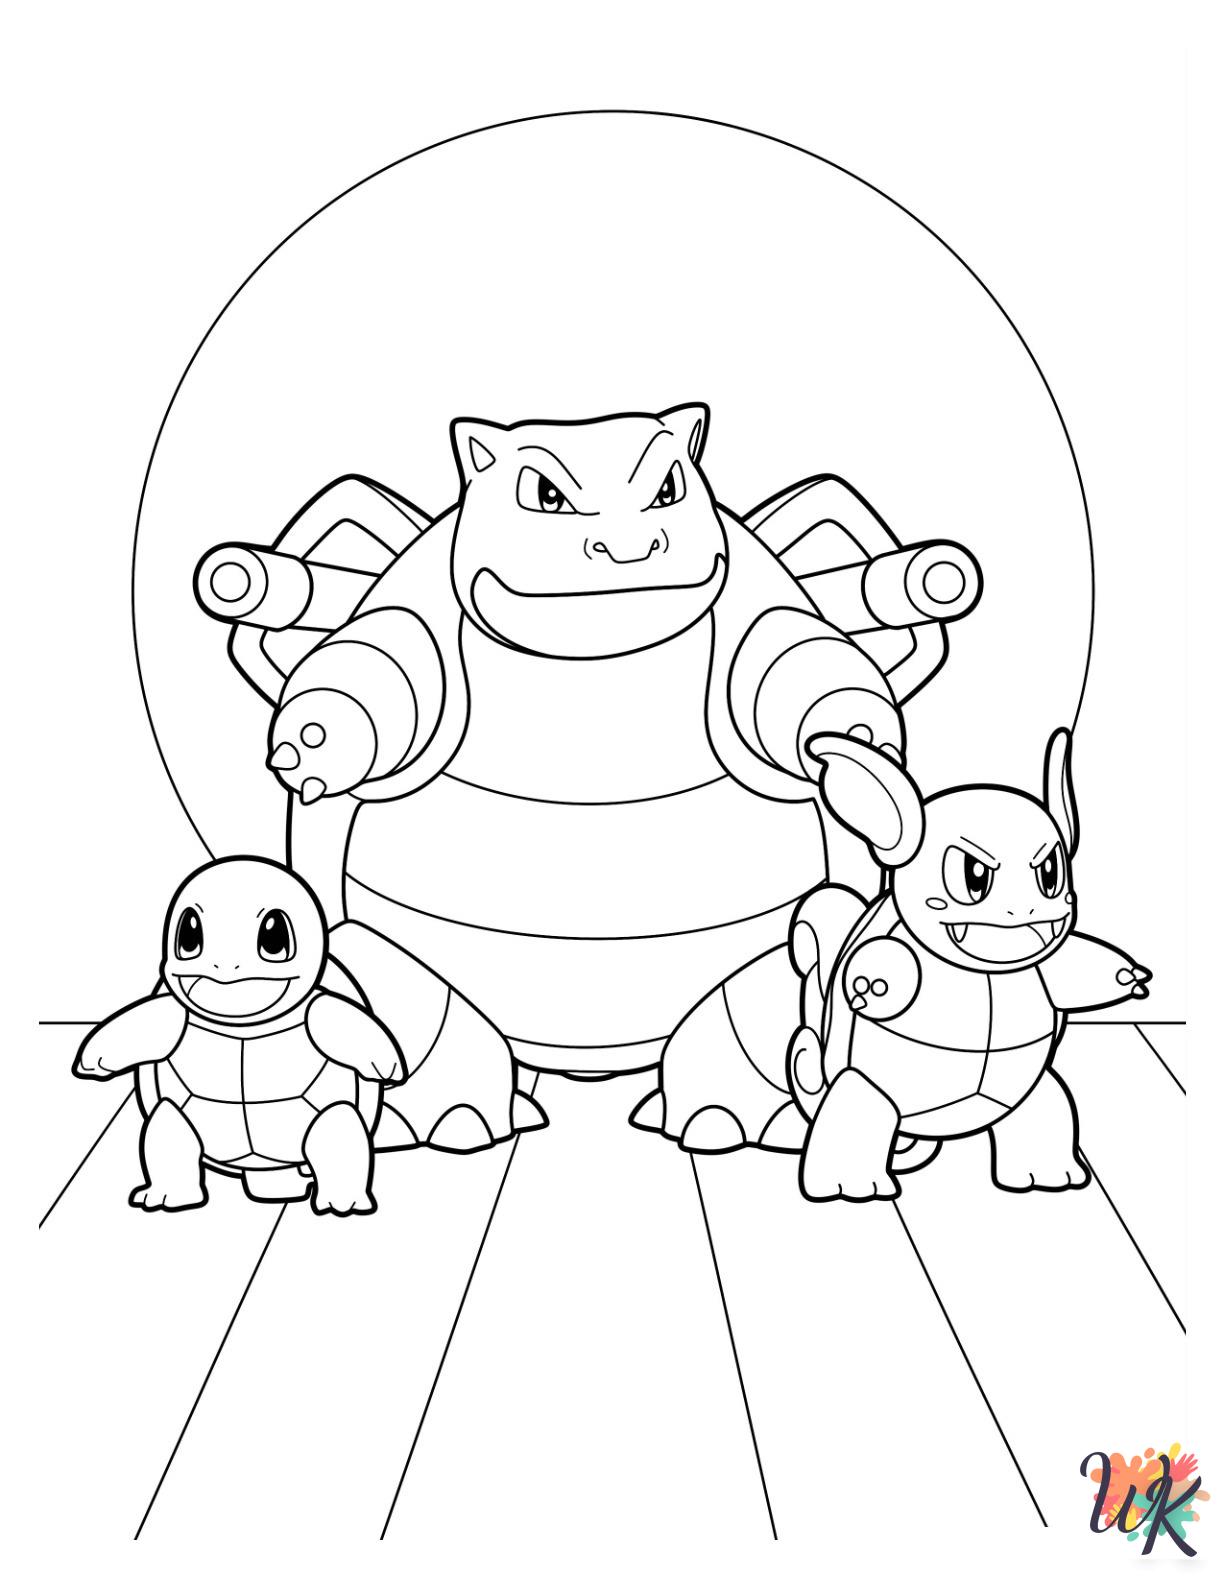 kawaii cute Squirtle coloring pages